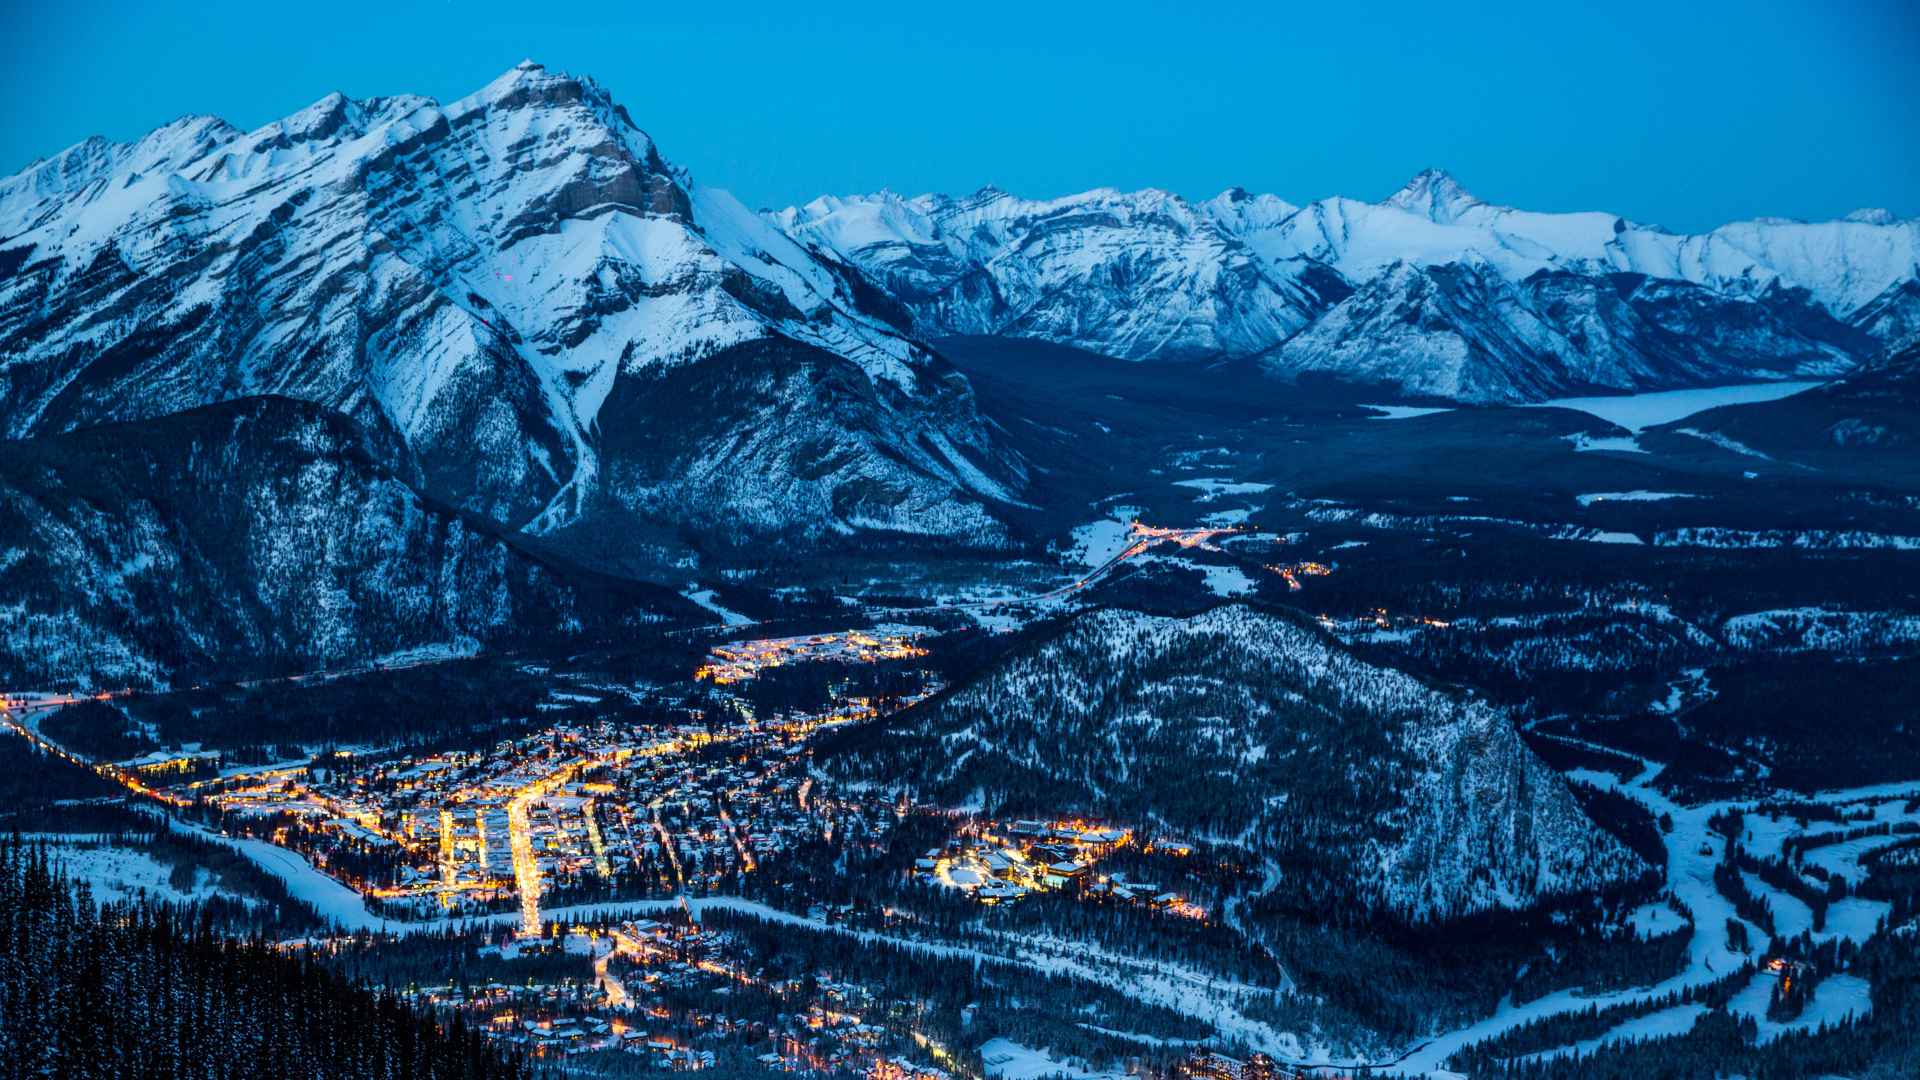 General 1920x1080 nature landscape mountains Canada Banff Banff National Park winter pine trees snow forest lights valley village Tunnel Mountain cyan blue city lights summit